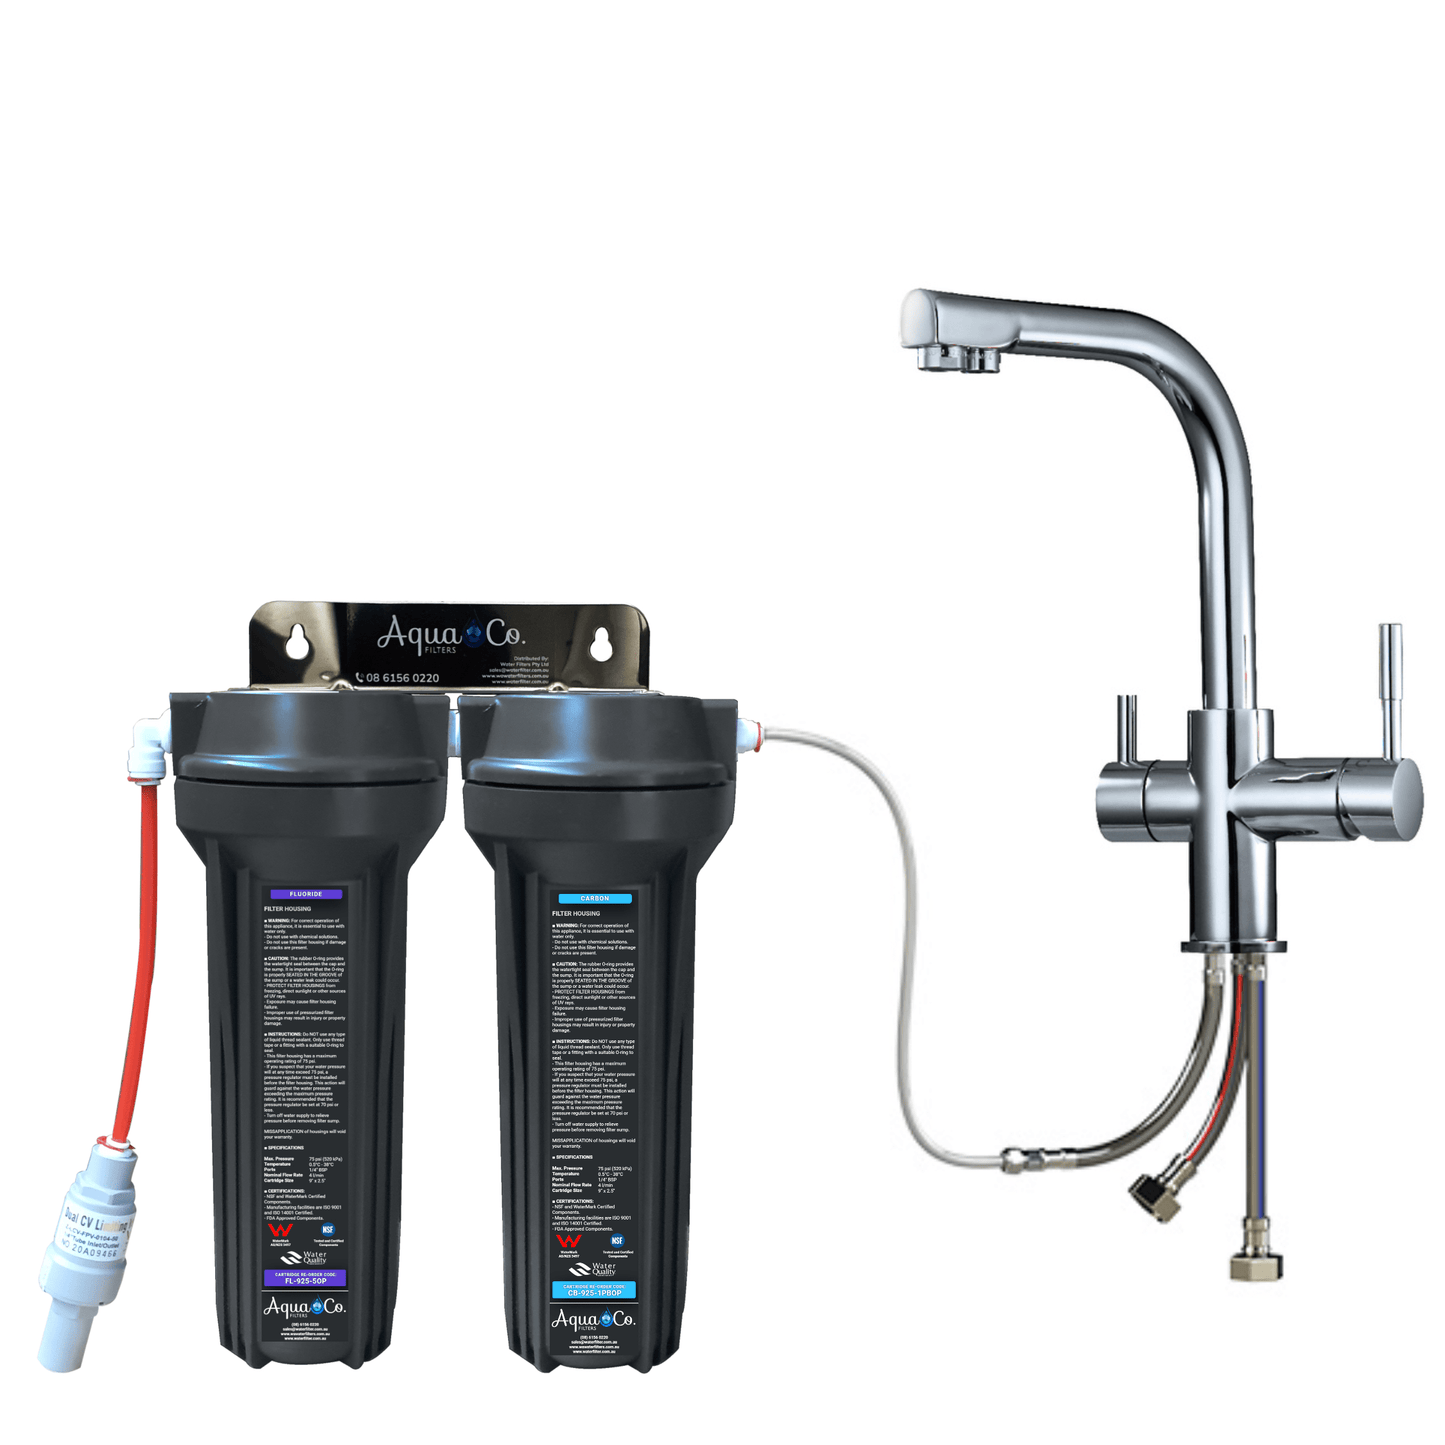 3 Way Mixer Tap with AquaCo SYS-925FC Undersink Water Filter - Reduces Chlorine, Taste, Odours, Parasites, Lead and Fluorides.